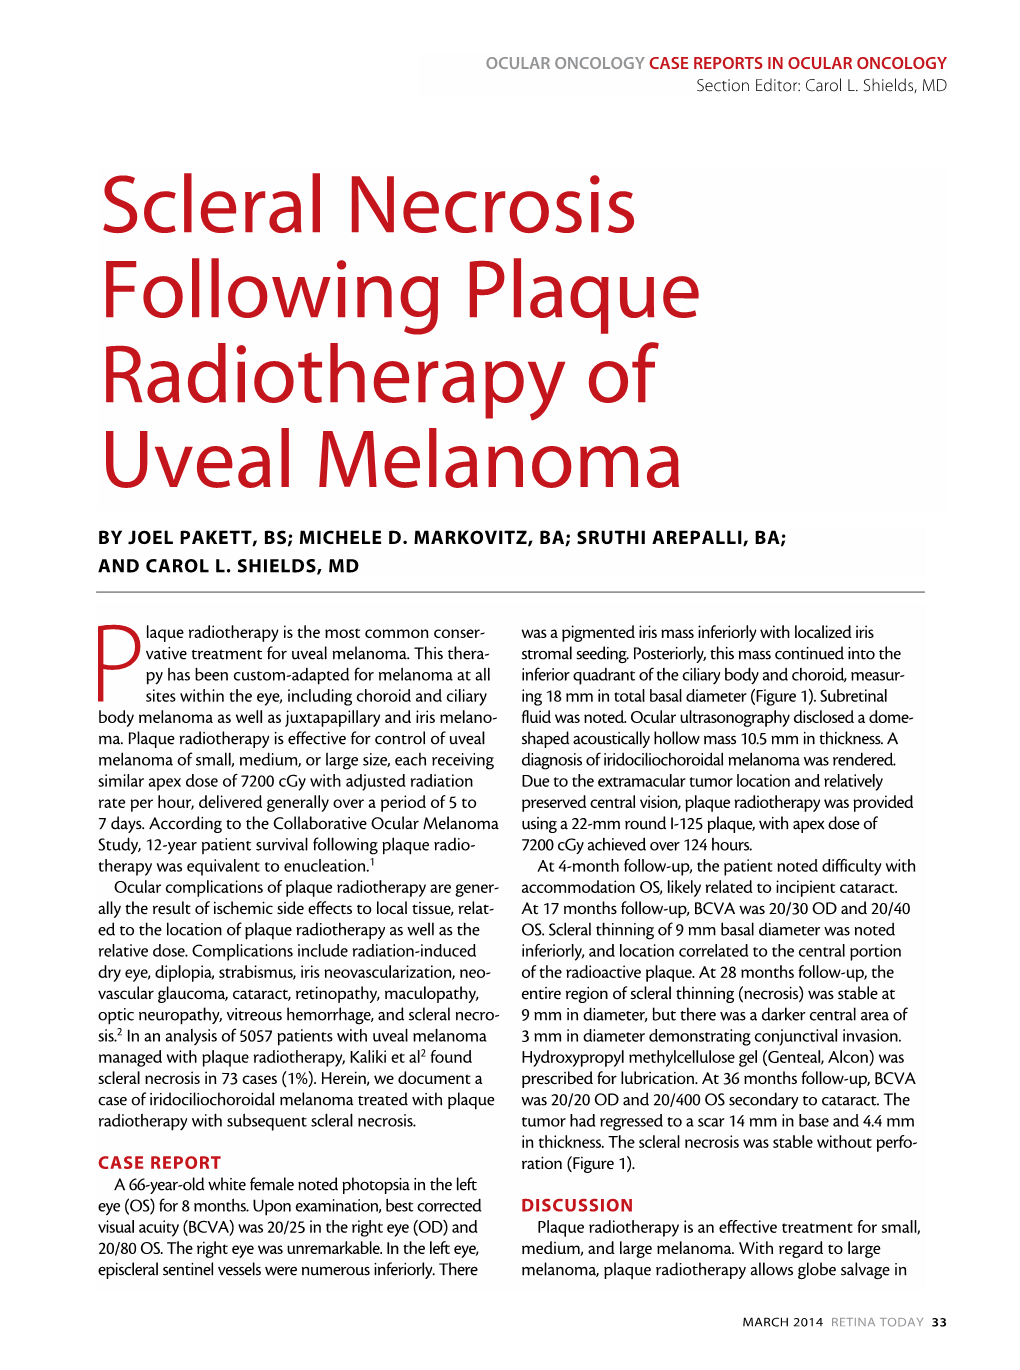 Scleral Necrosis Following Plaque Radiotherapy of Uveal Melanoma